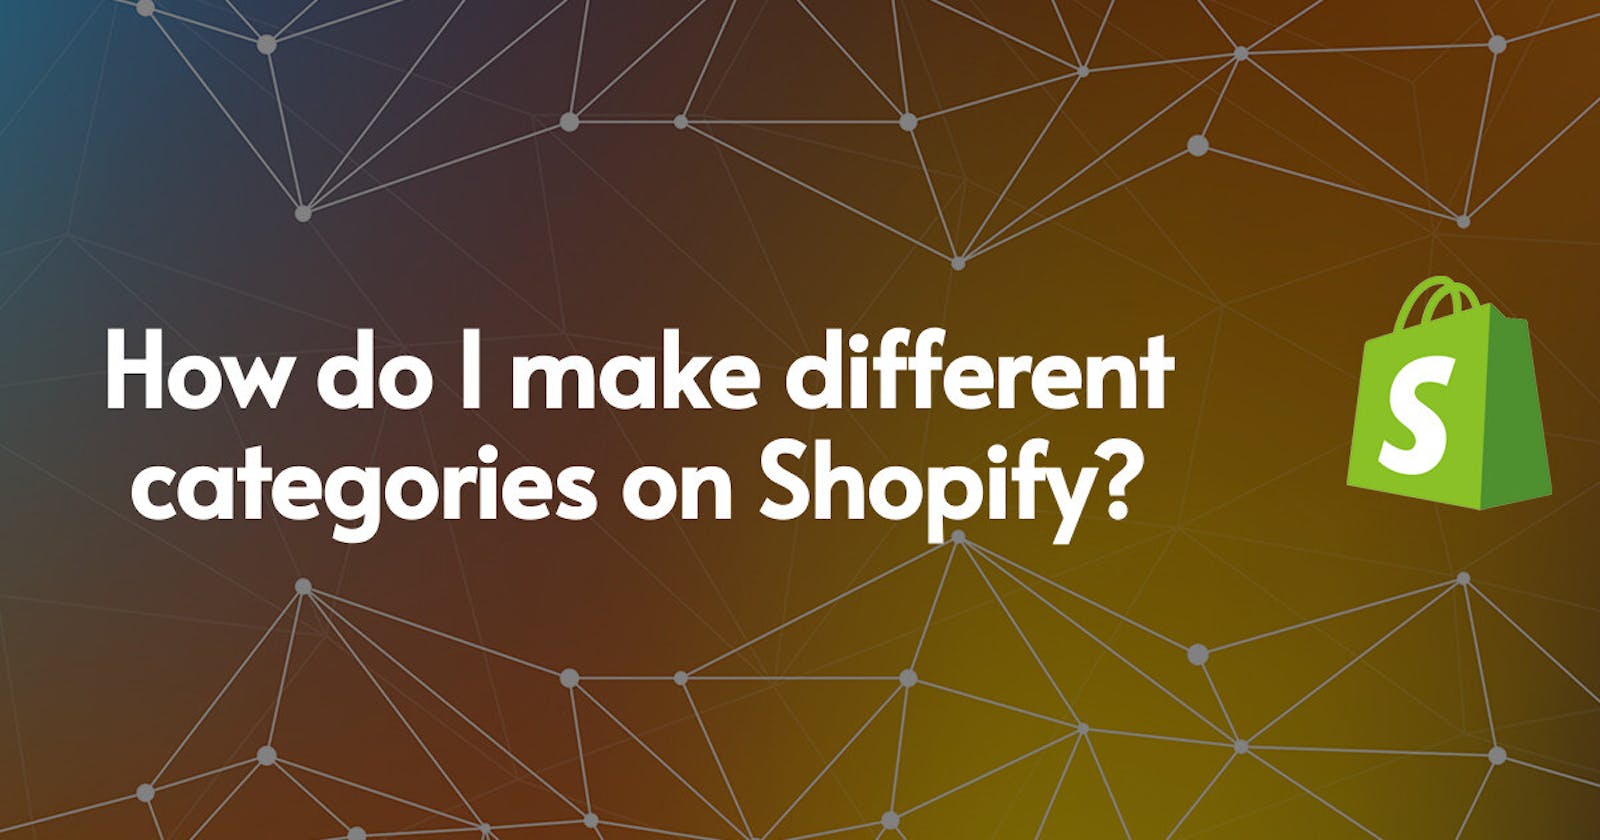 How do I make different categories on Shopify?